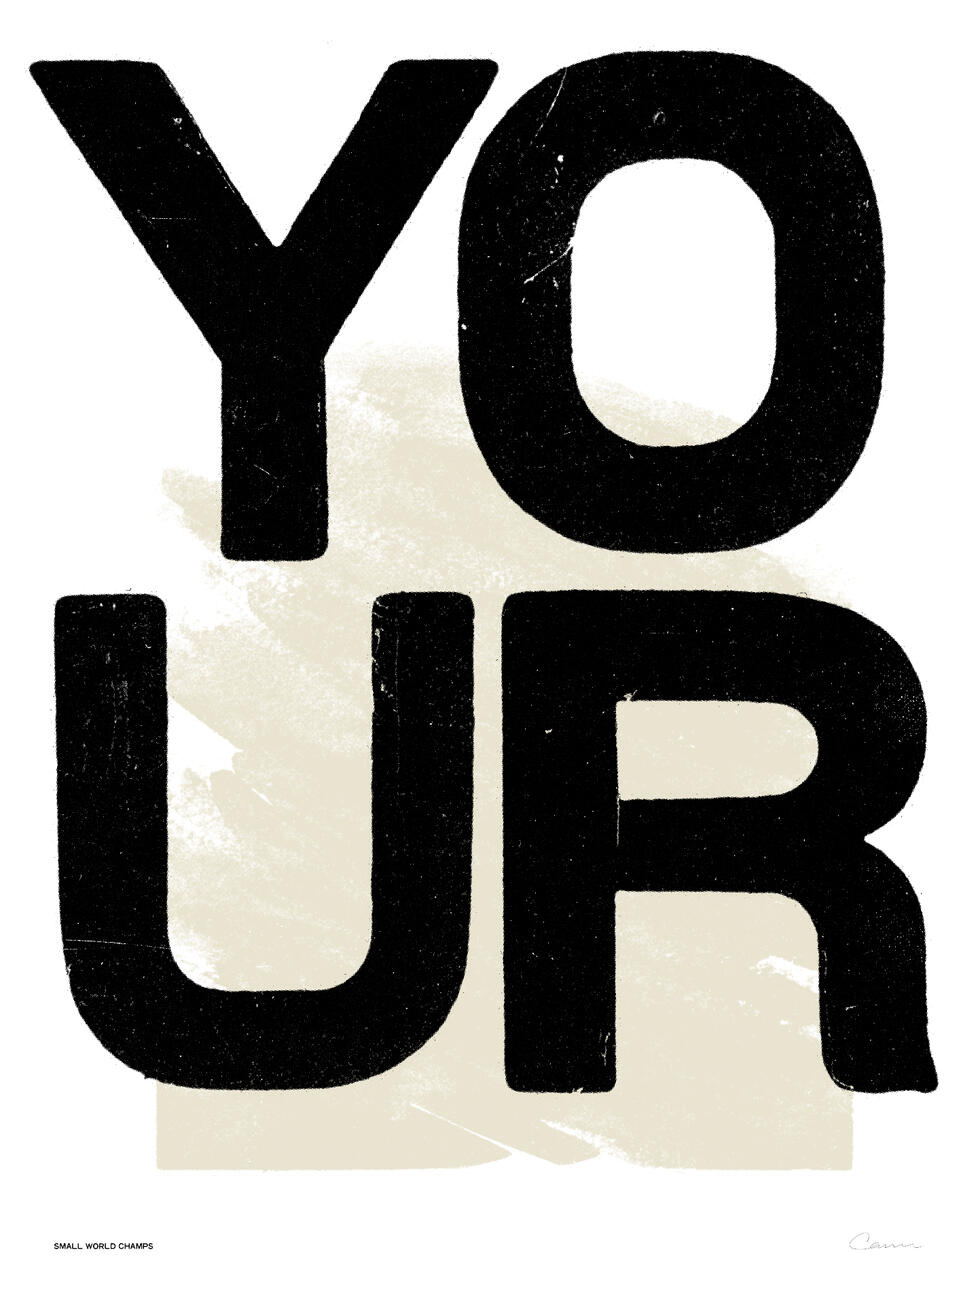 Your